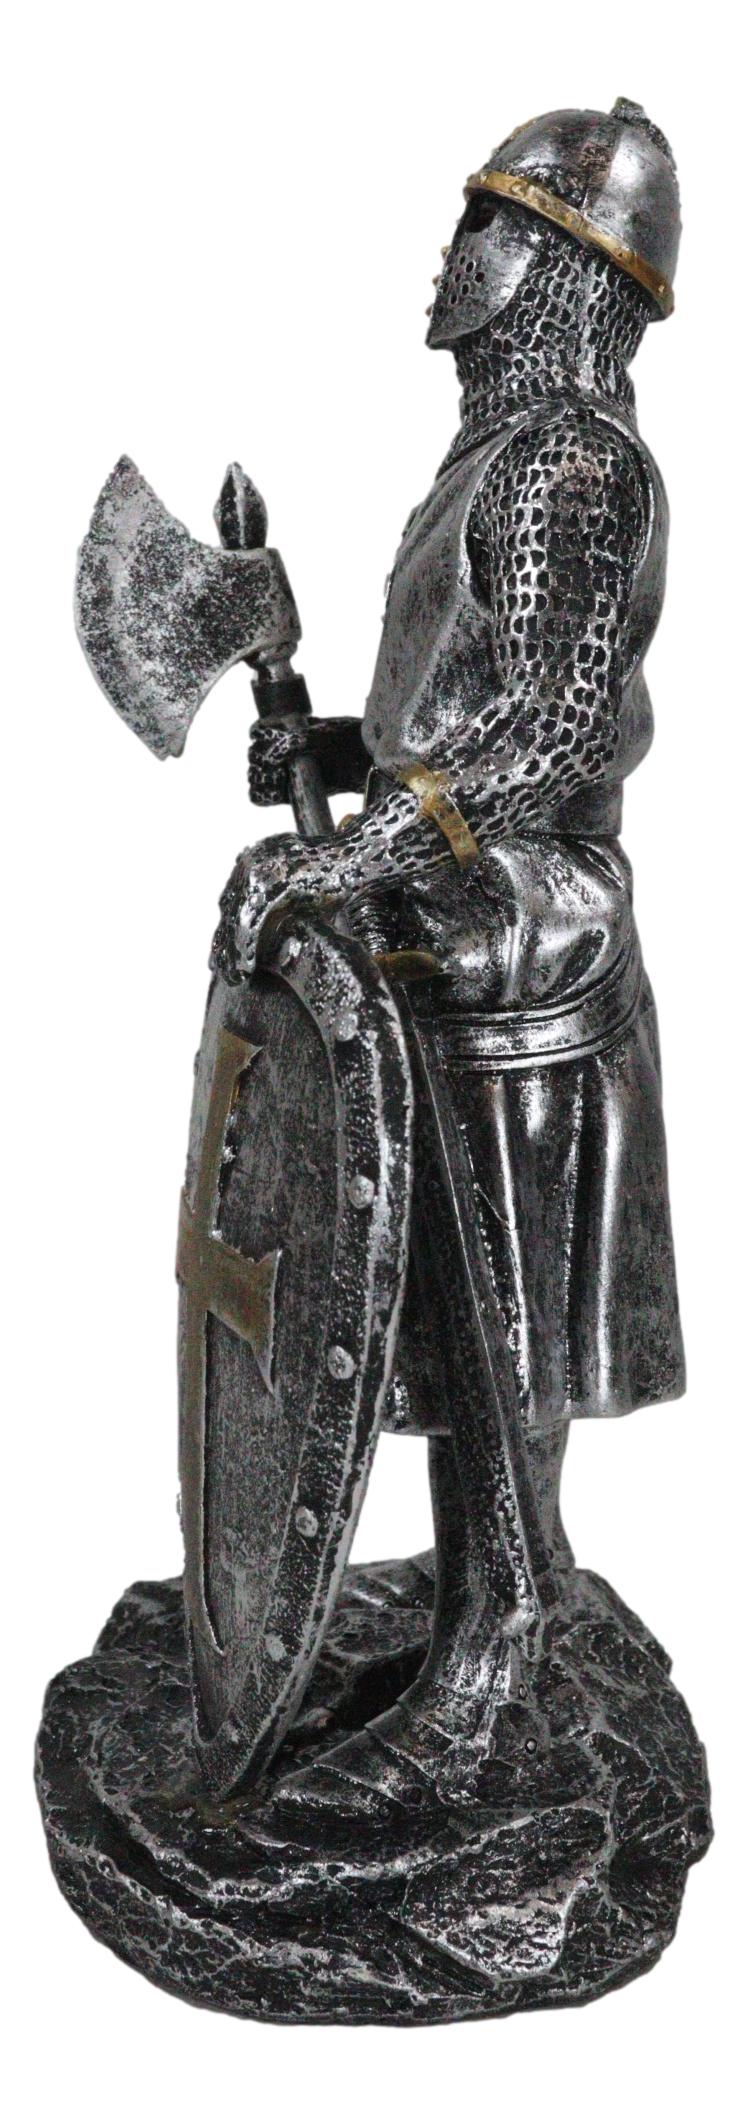 Medieval Crusader Knight Of The Cross With Axe and Broad Shield Figurine 7"H